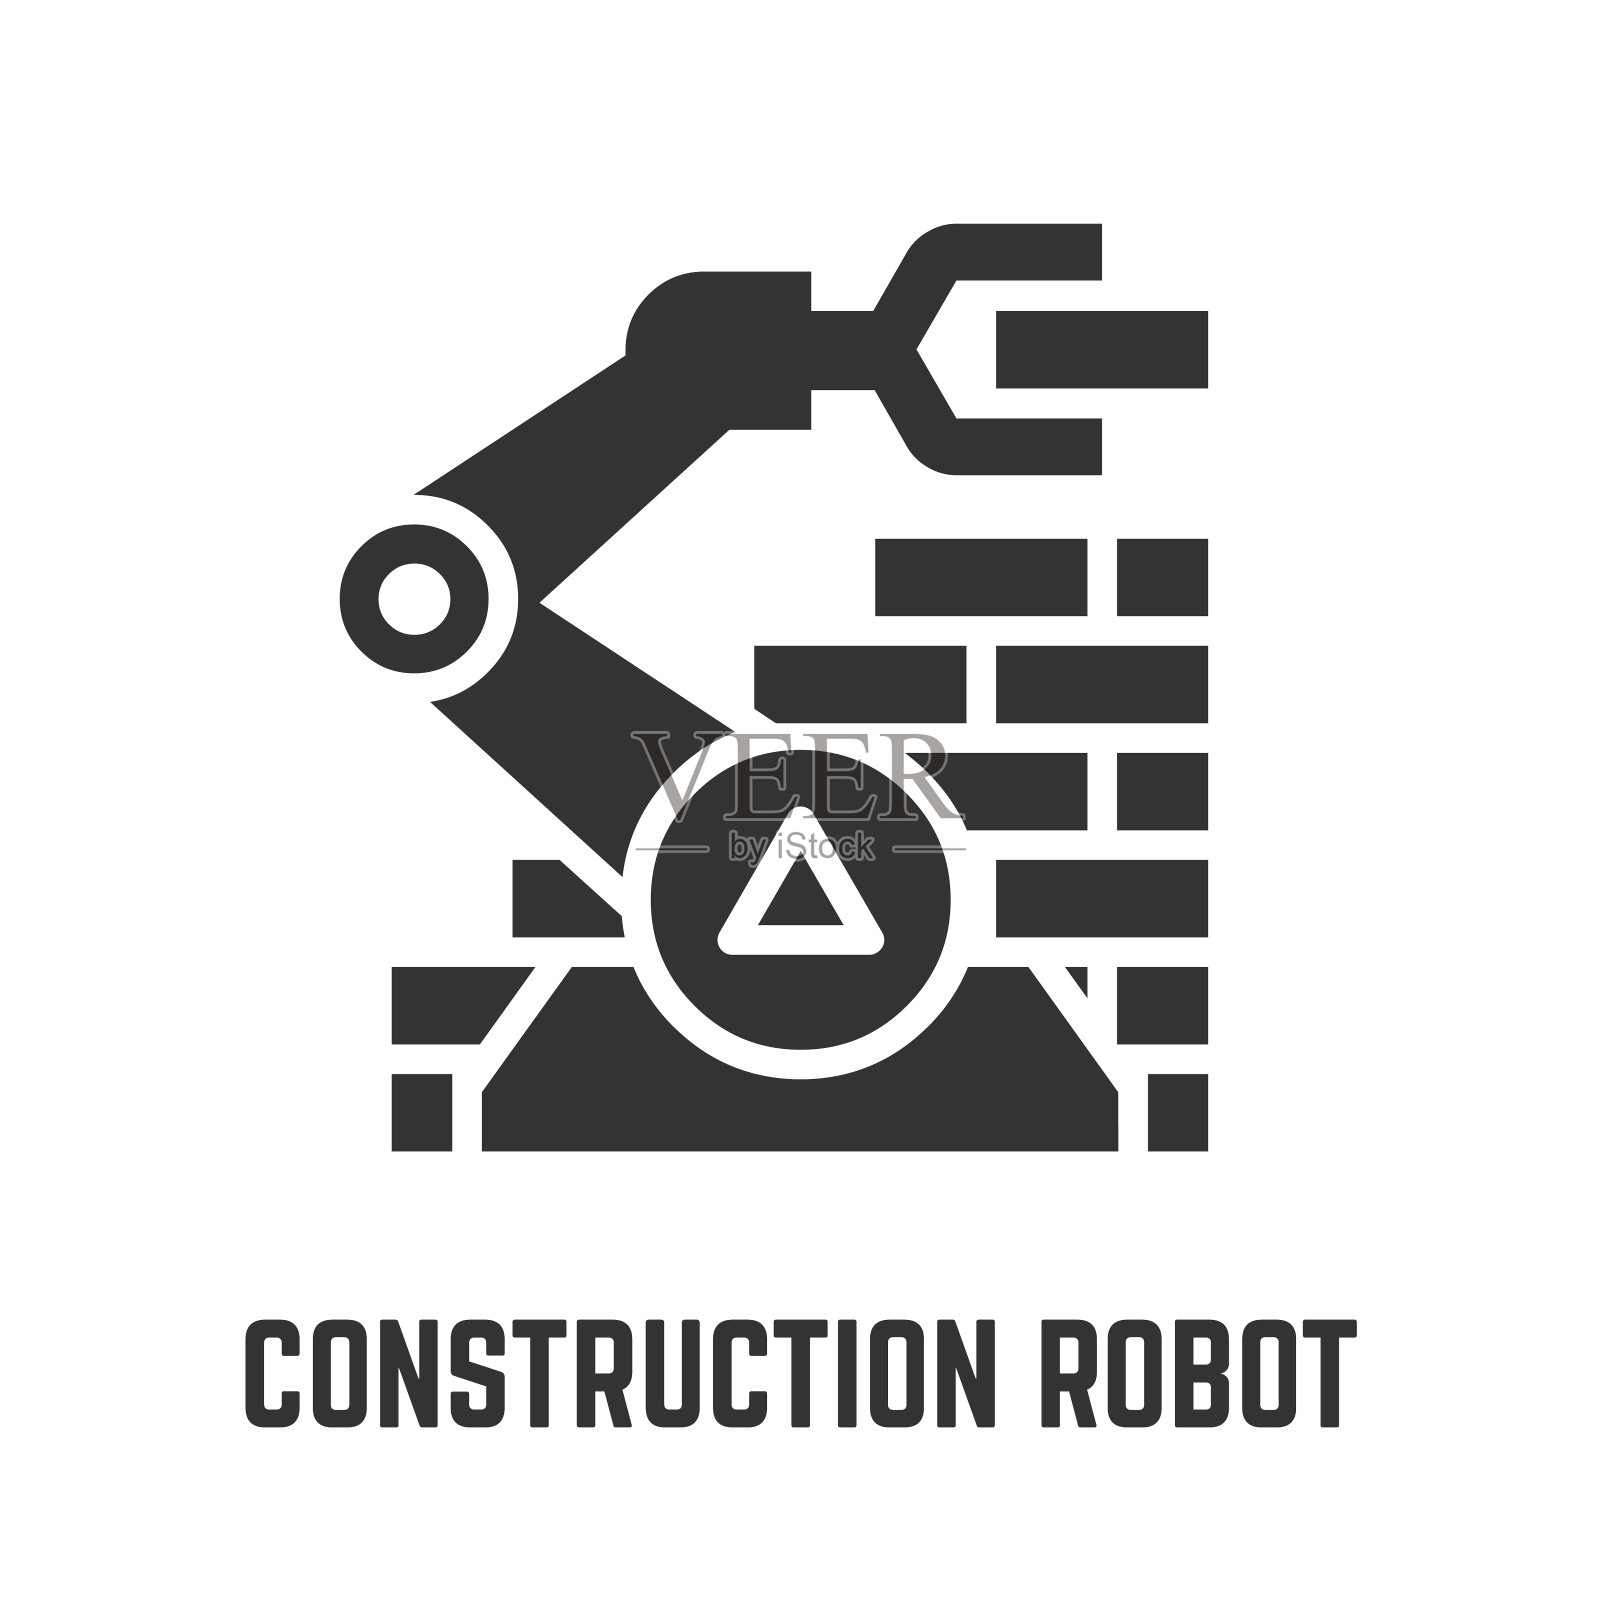 Construction robot icon with semi automated bricklaying autonomous machine glyph symbol.插画图片素材